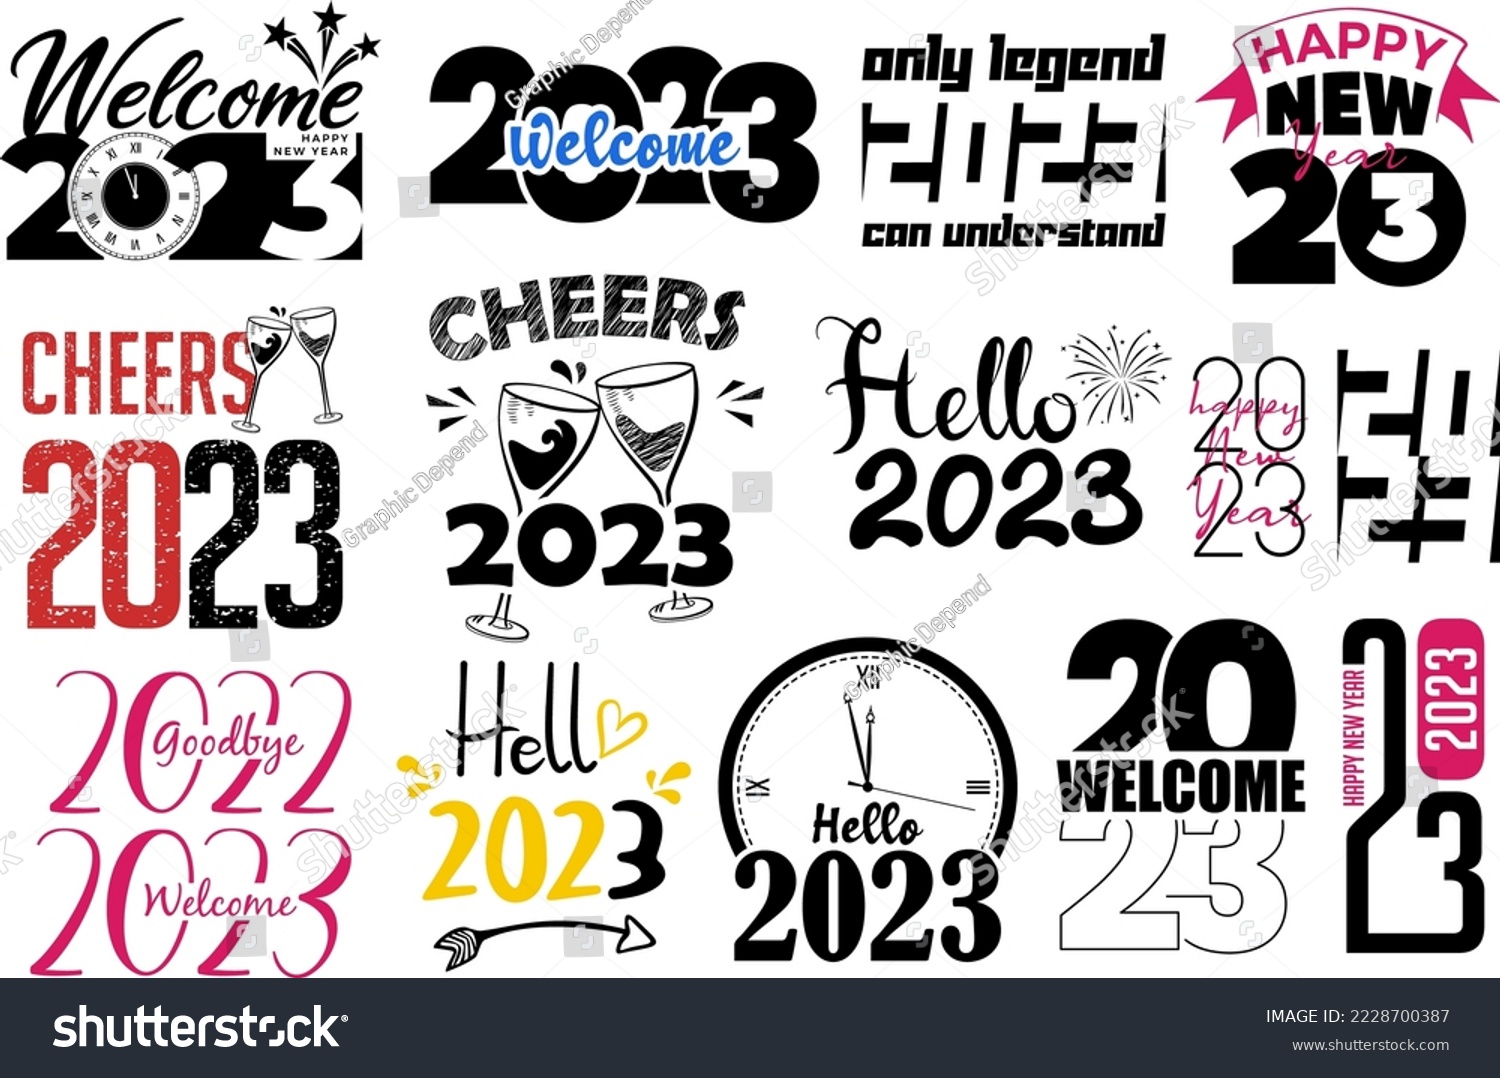 SVG of happy new year 2023 creative clipart bundle can be used for t-shirt, mug, stickers, cut file and many more svg